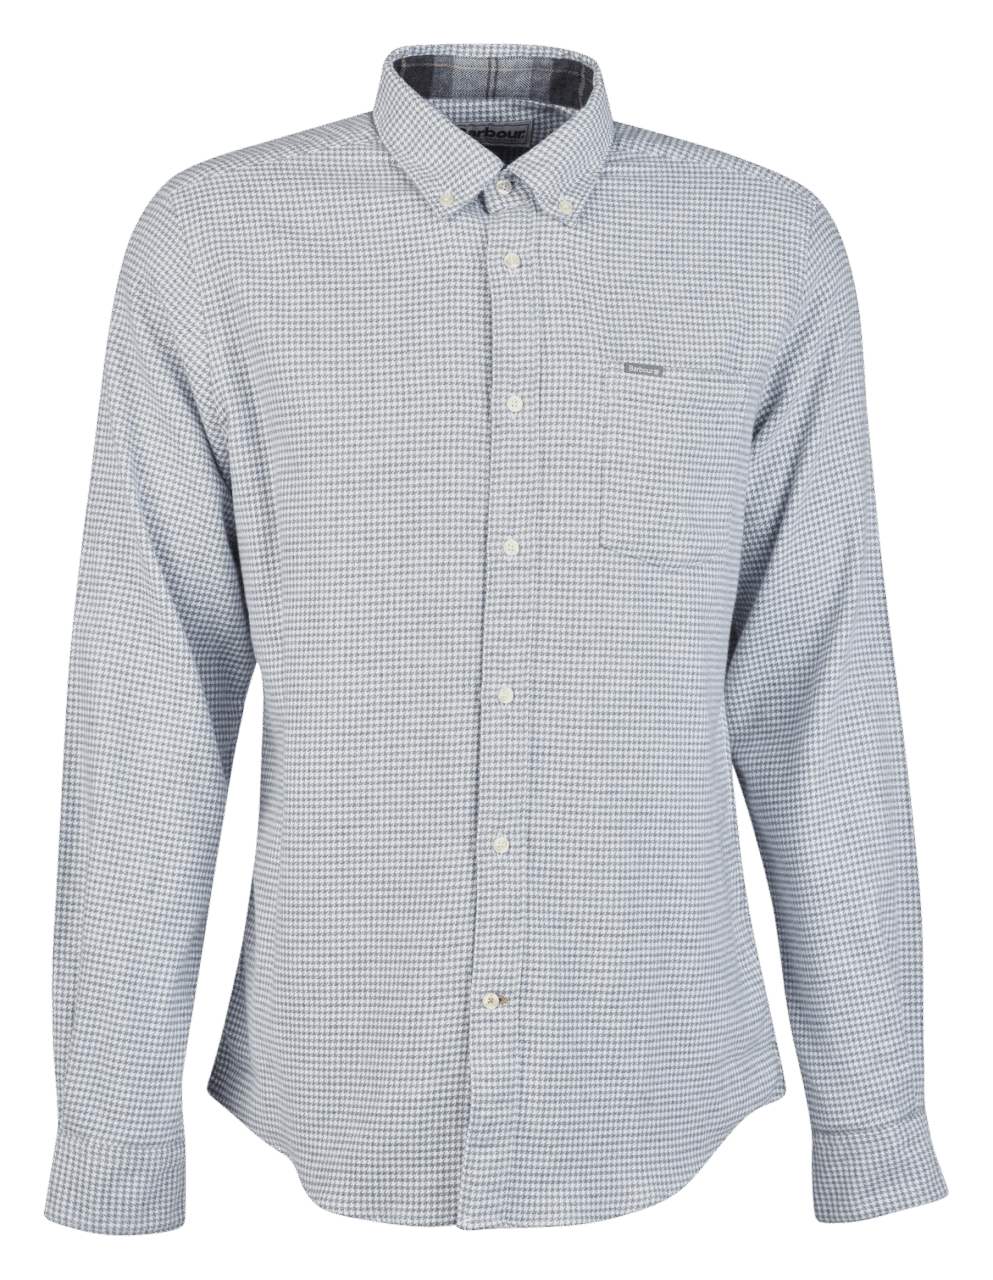 Barbour Oakfield Shirt - grey marle check